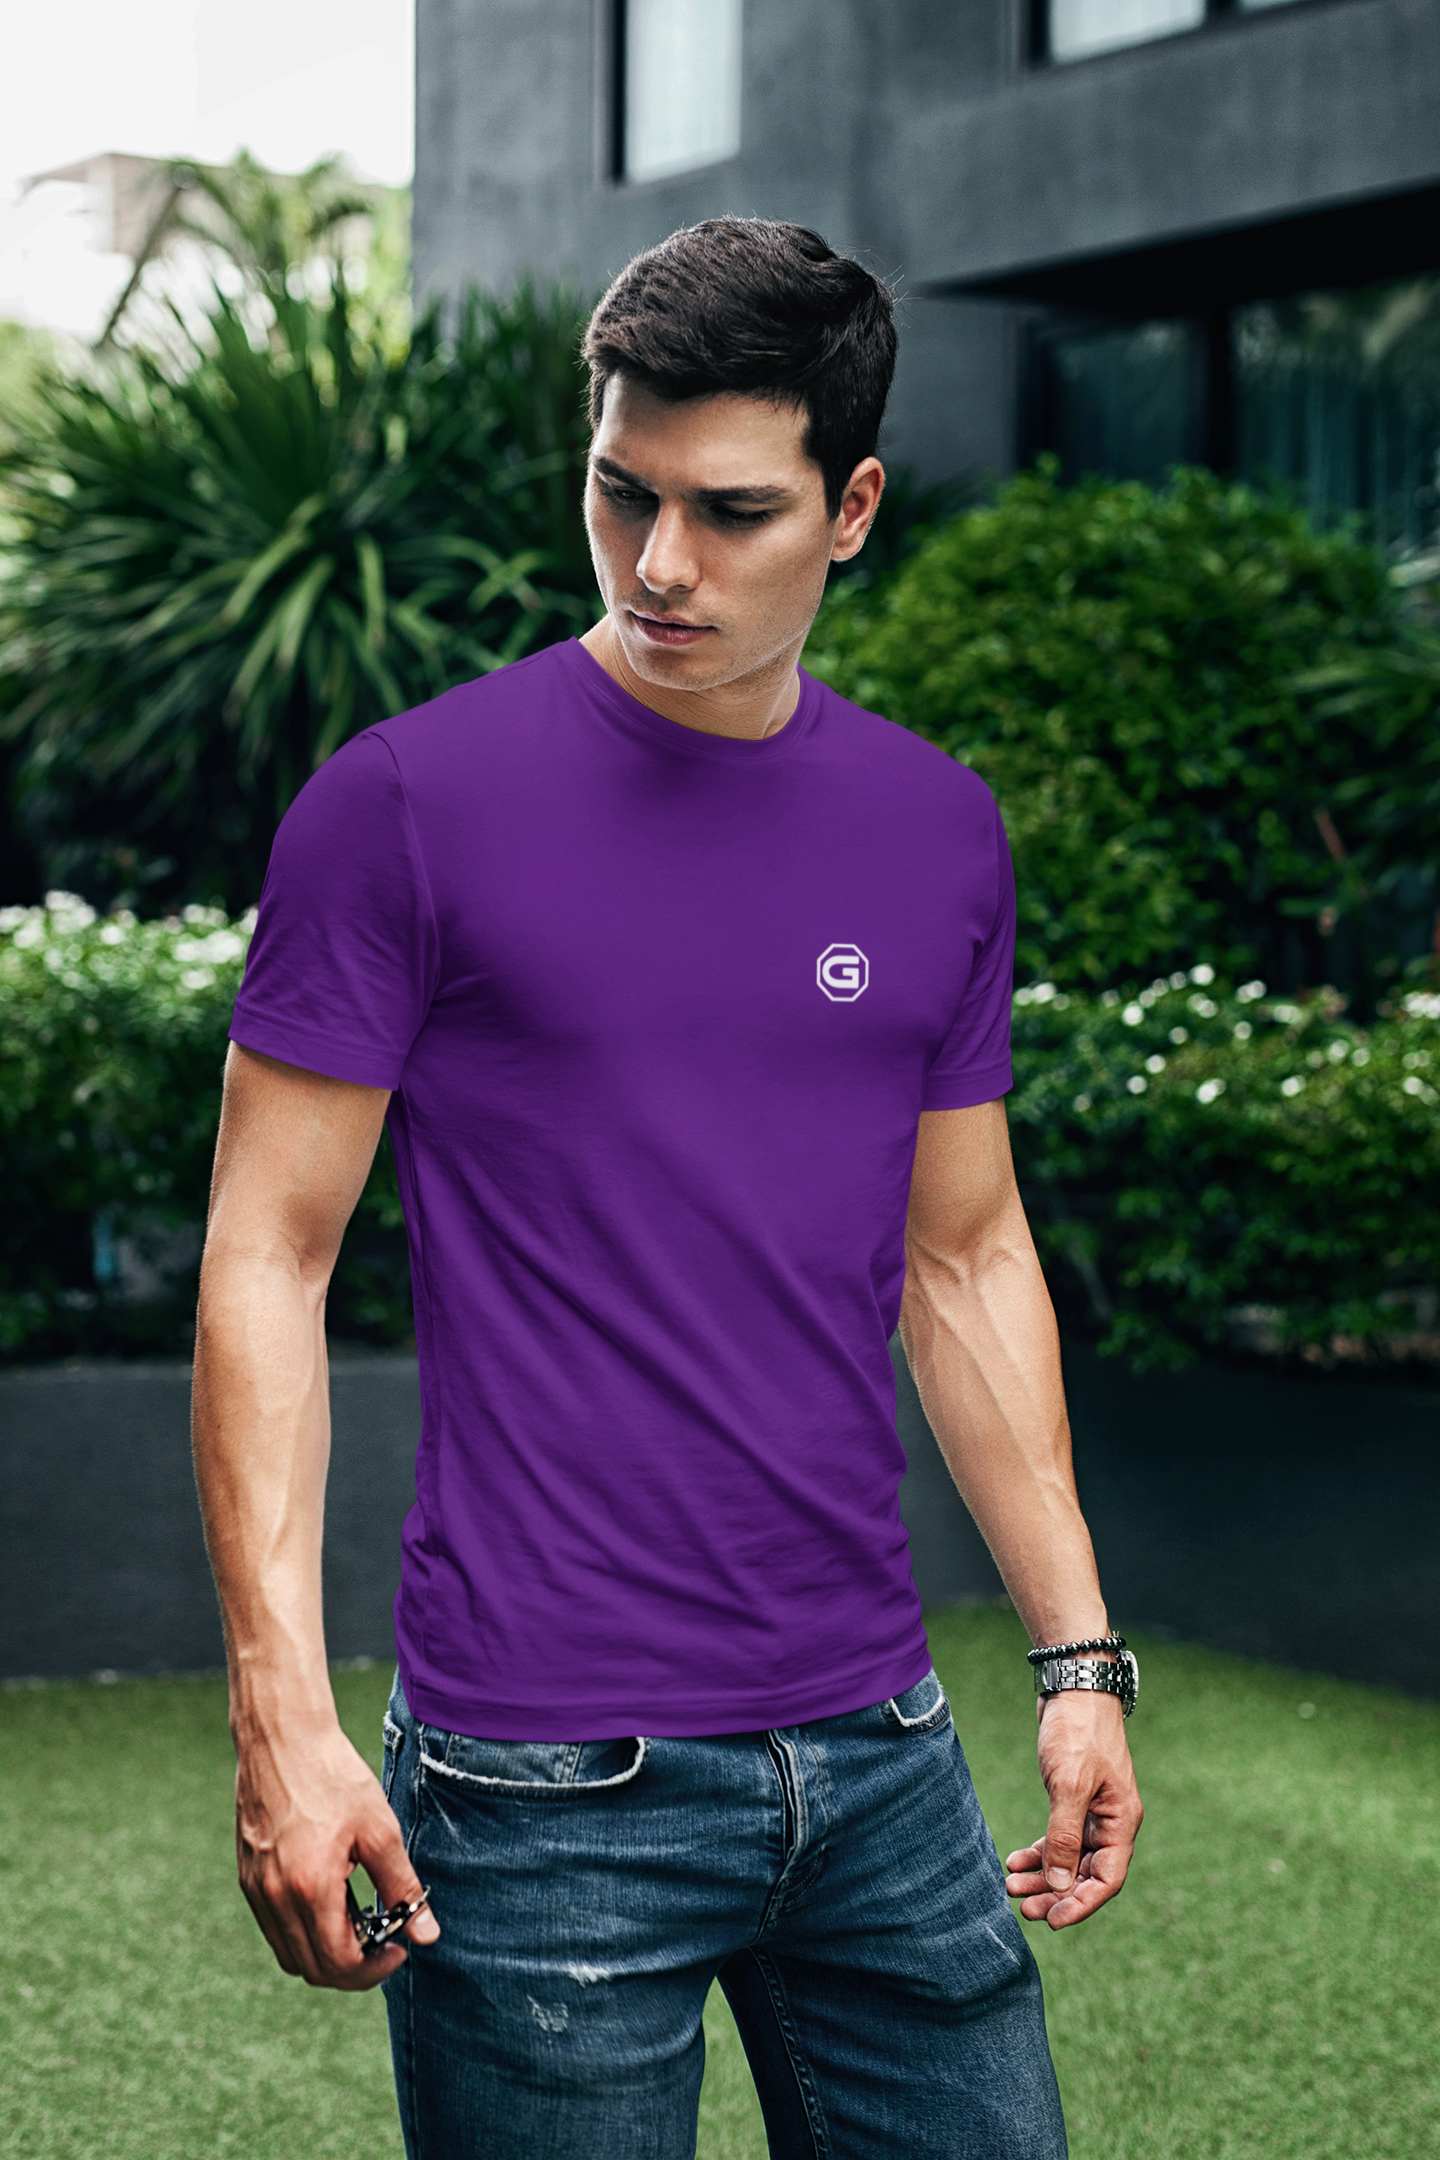 Stylish T shirts for men Active / Leisure Wear | Gymate small G logo purple